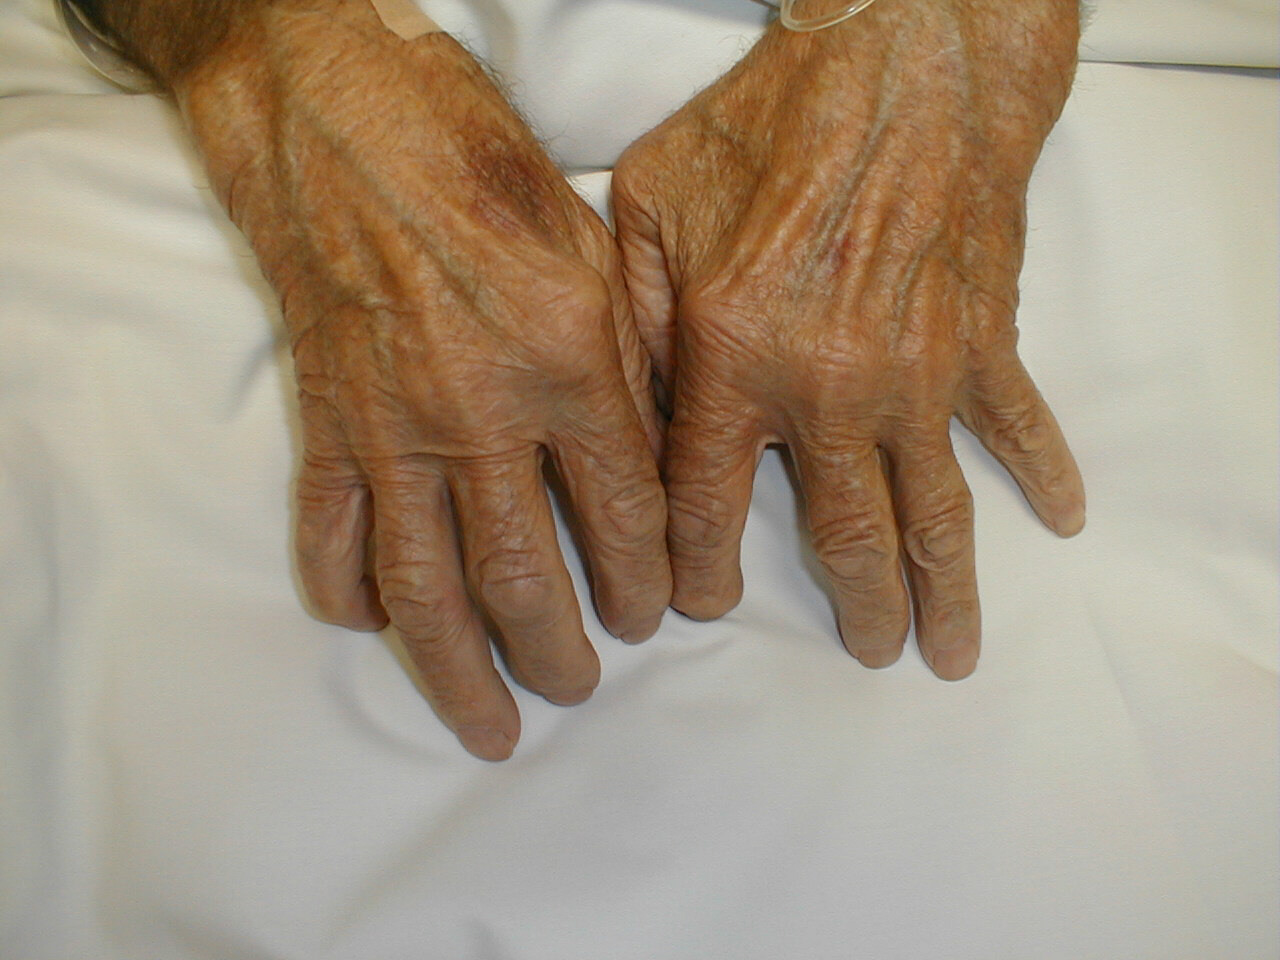 Hands of a person suffering from rheumatoid arthritis